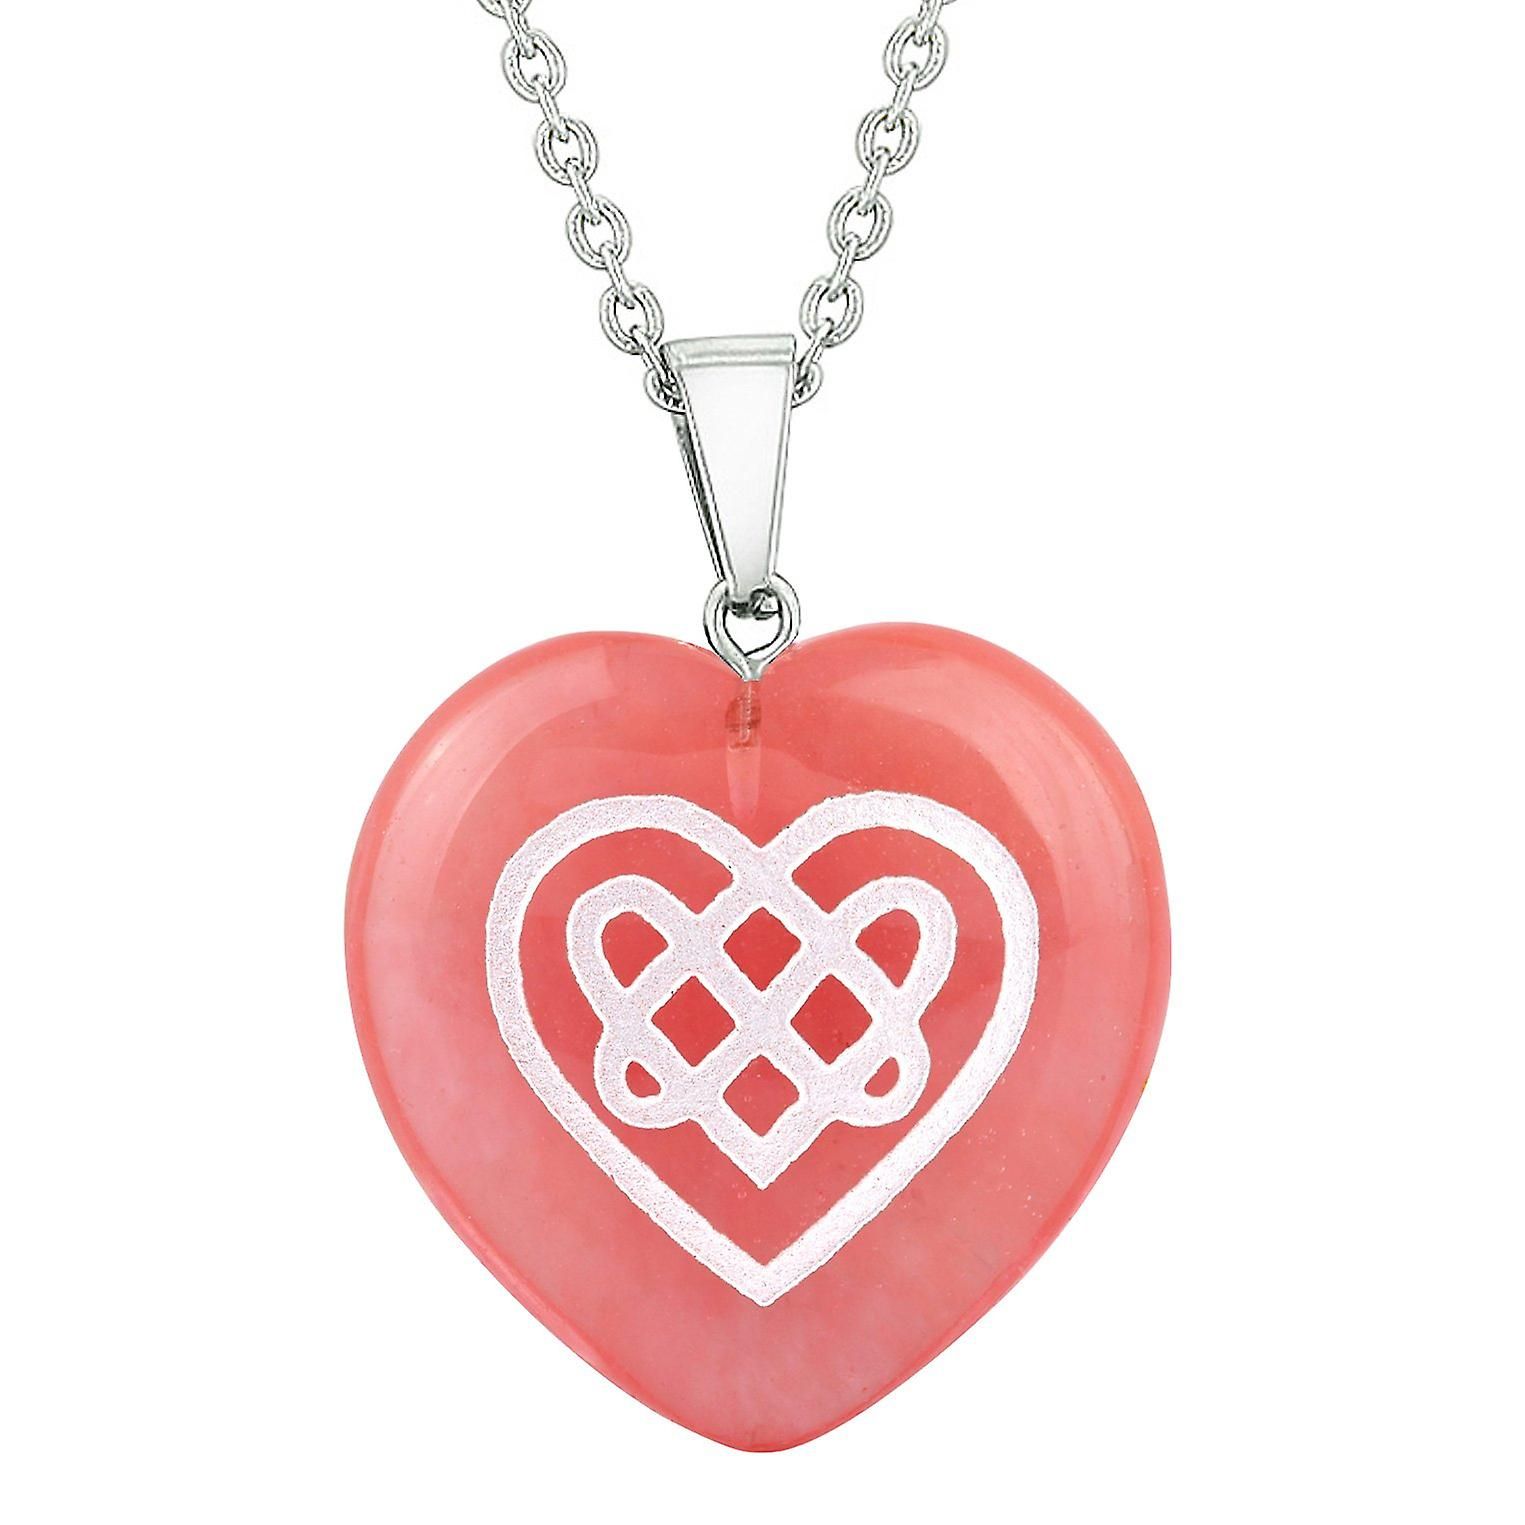 Amulet Celtic Shiled Knot Heart Power Energy Cherry Simulated Quartz Puffy  Heart Pendant Necklace Throughout Most Recent Knotted Heart Pendant Necklaces (View 13 of 25)